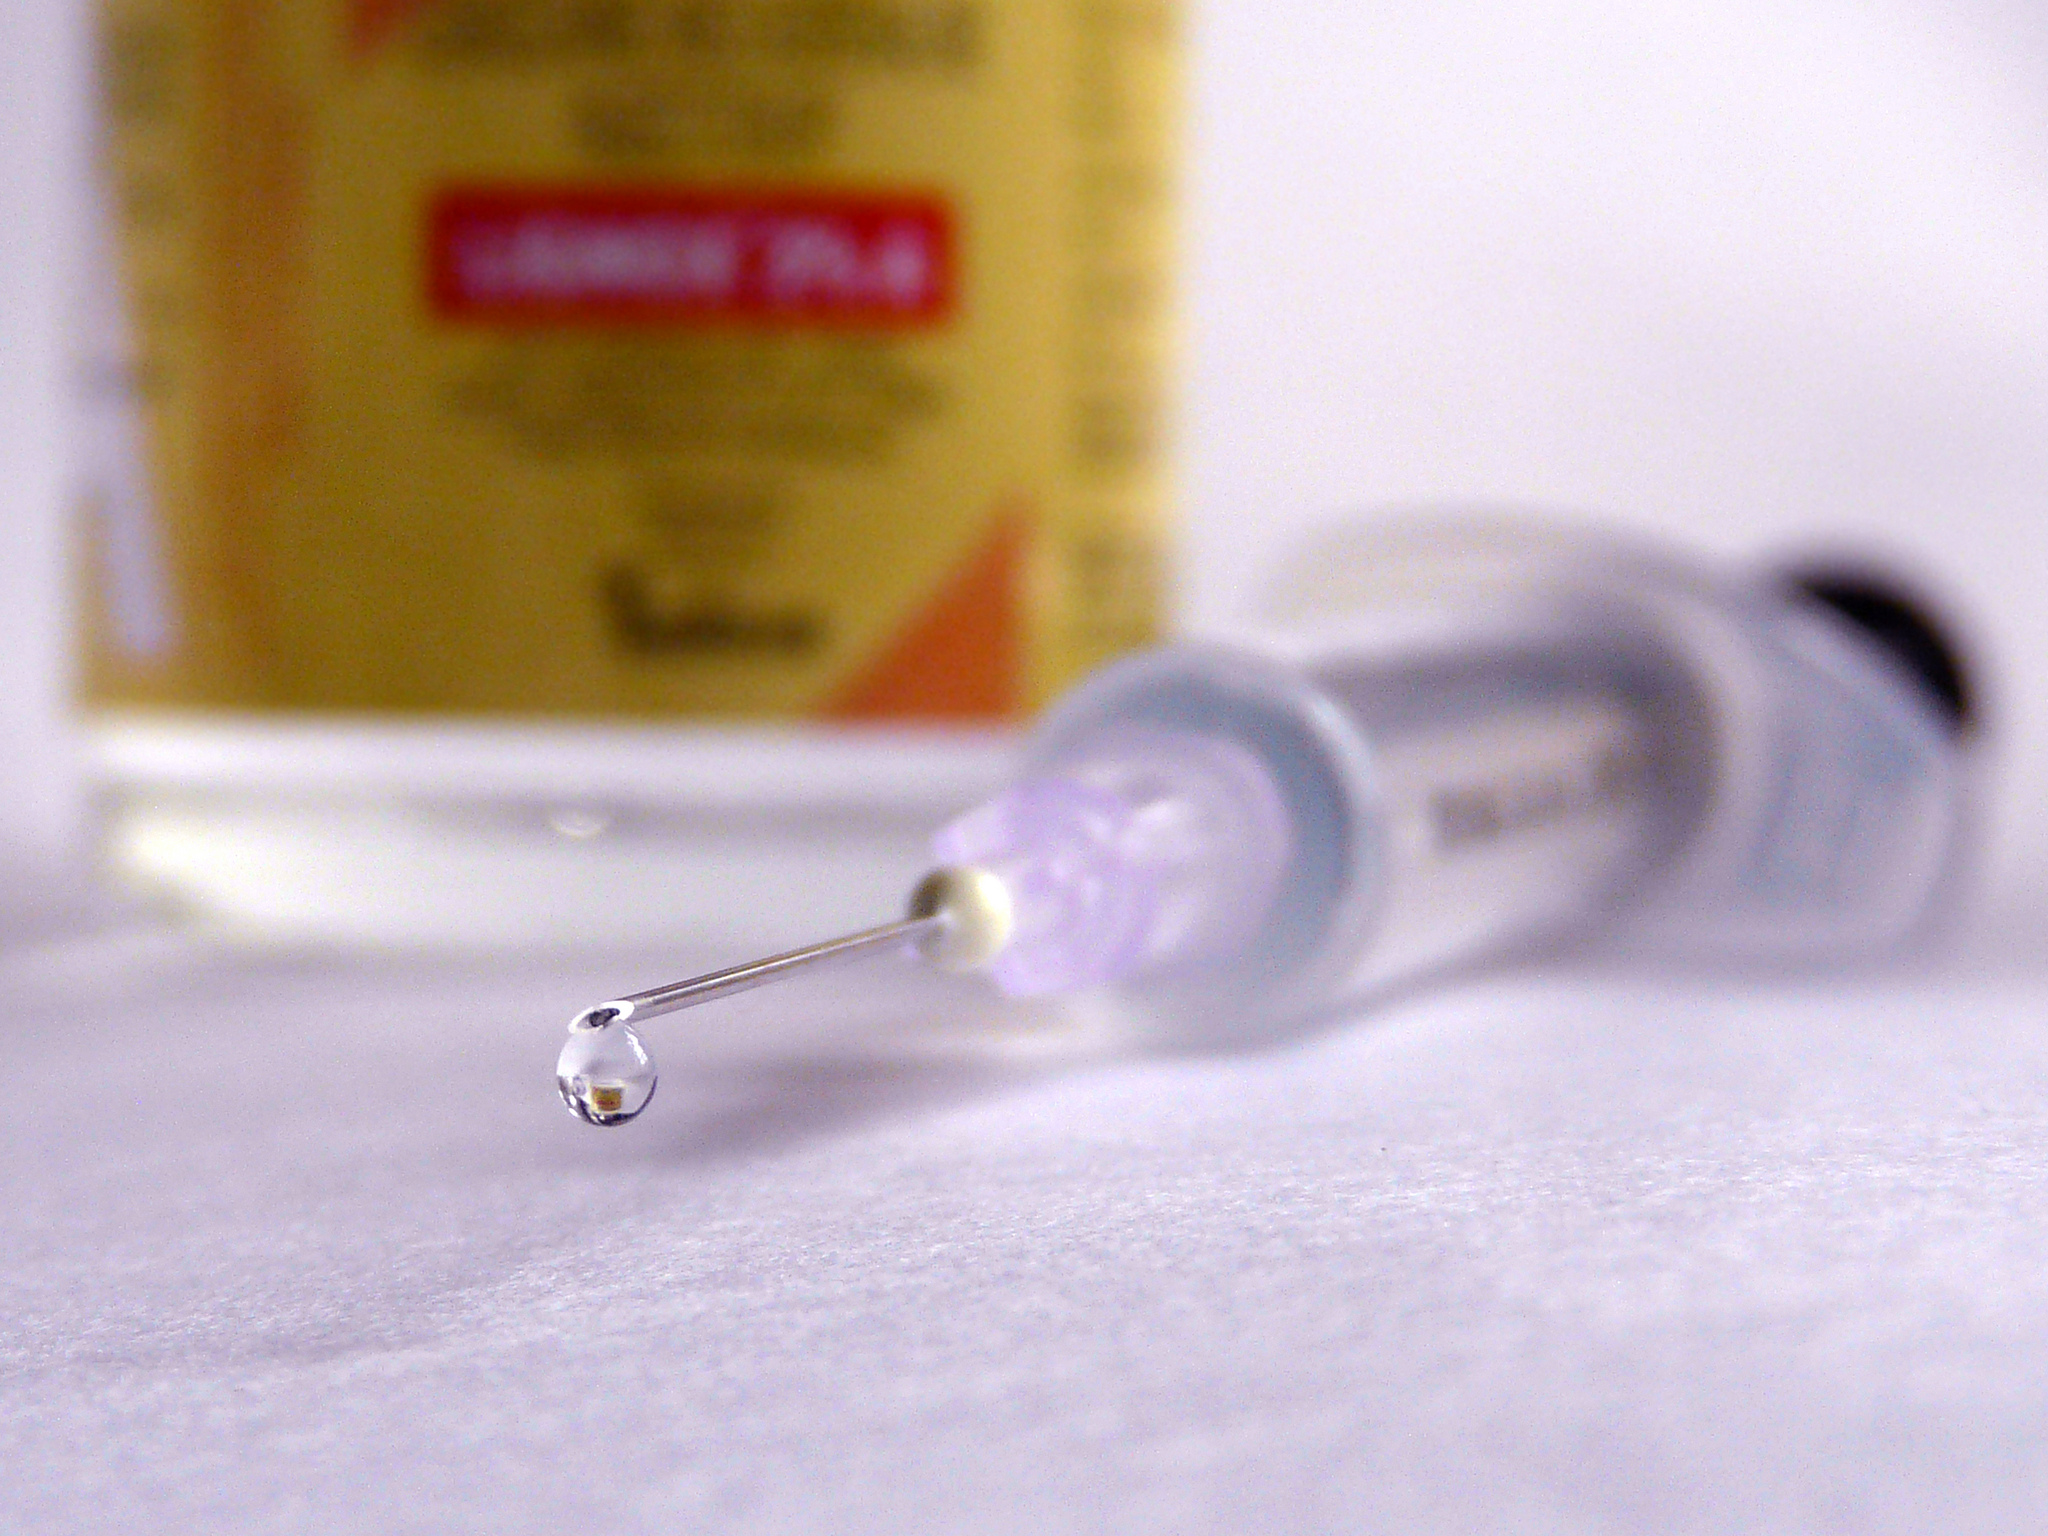 The World Health Organization Wants Everybody To Use Smart Syringes By 2020